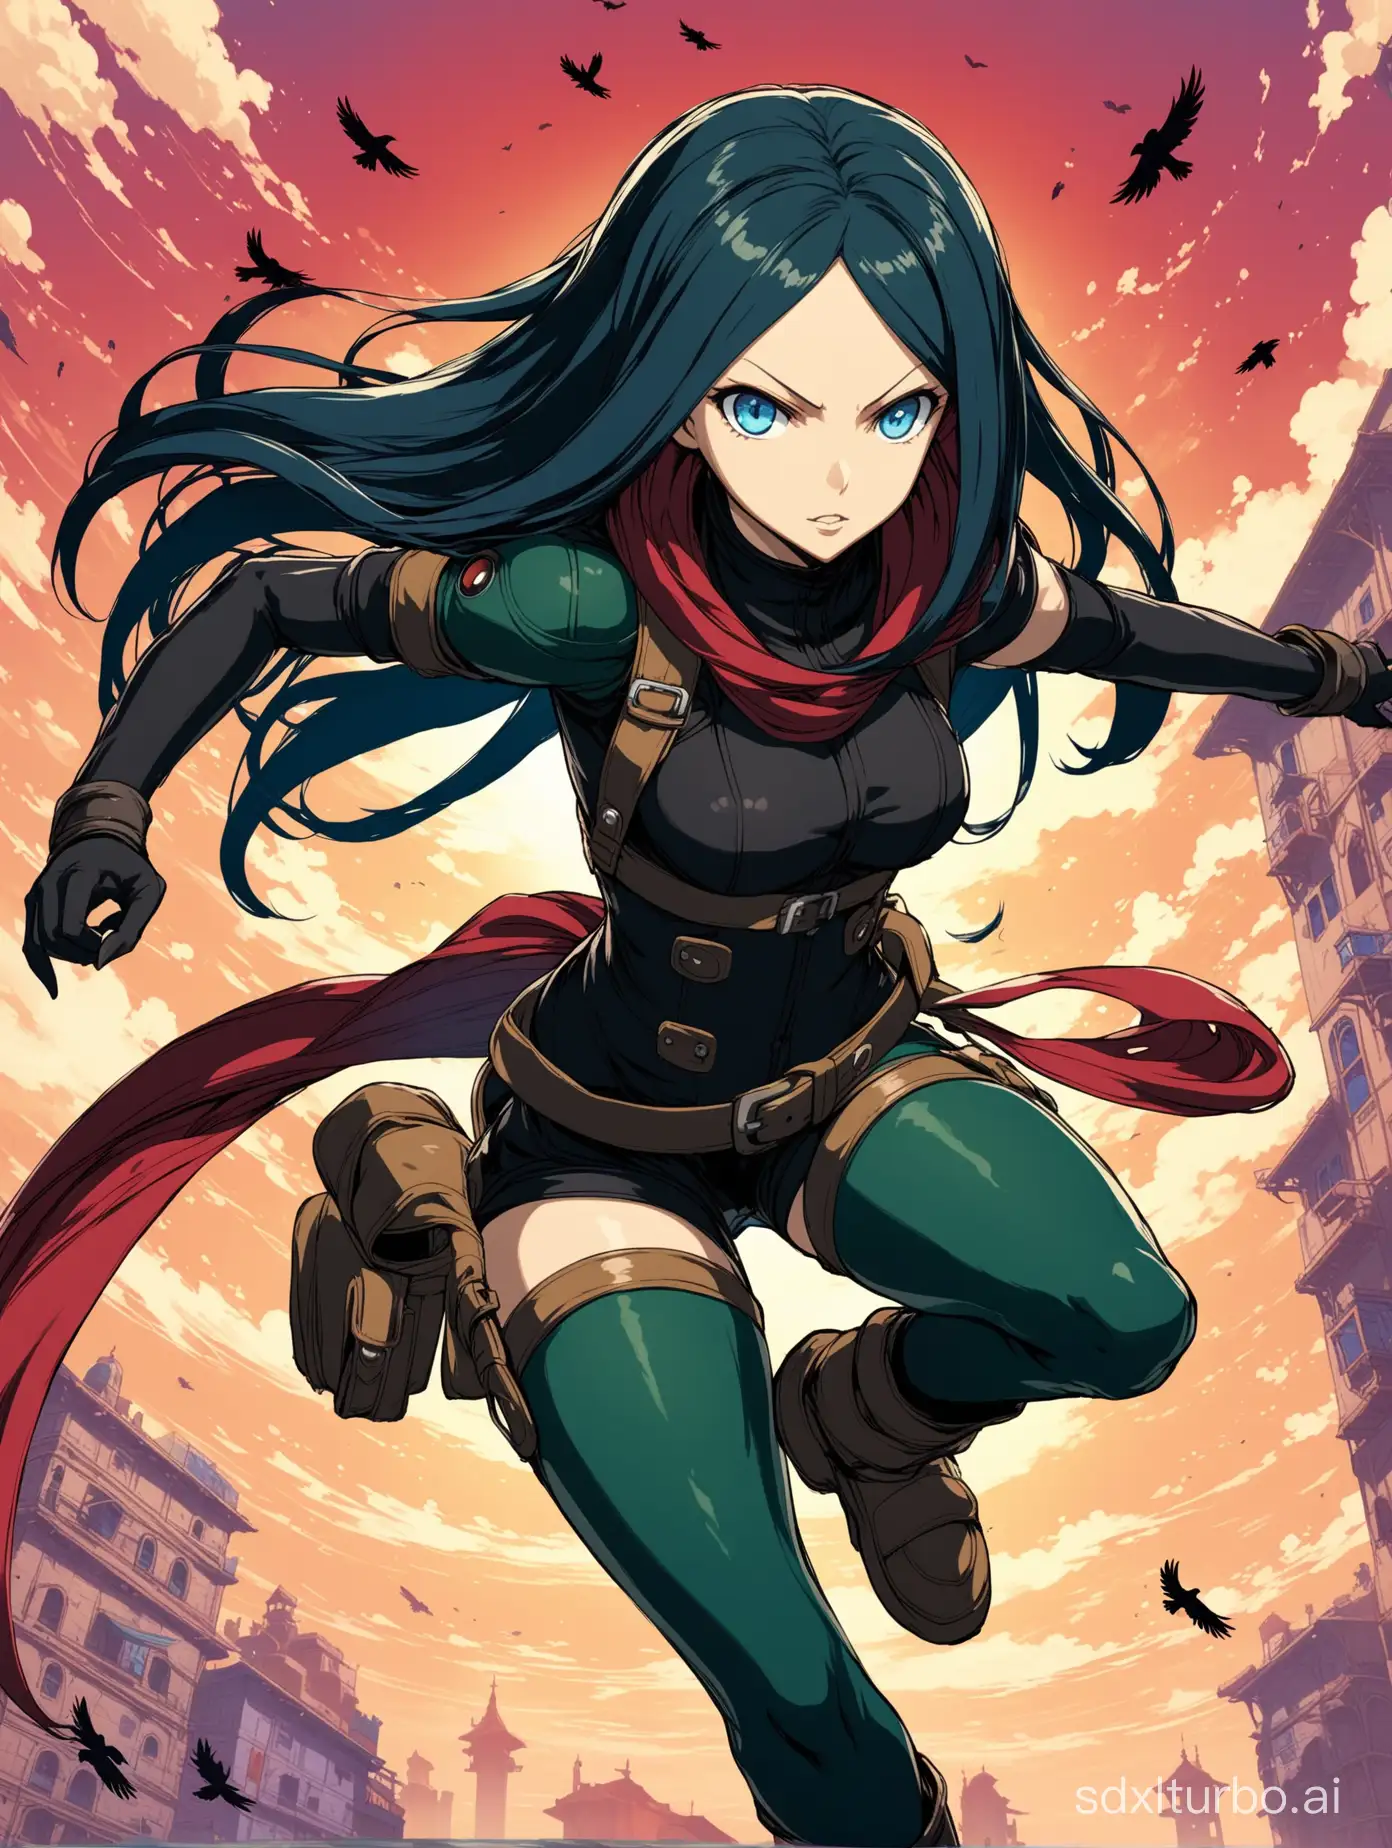 Dynamic-Raven-from-Gravity-Rush-2-with-Striking-Black-and-Red-Hair-in-Action